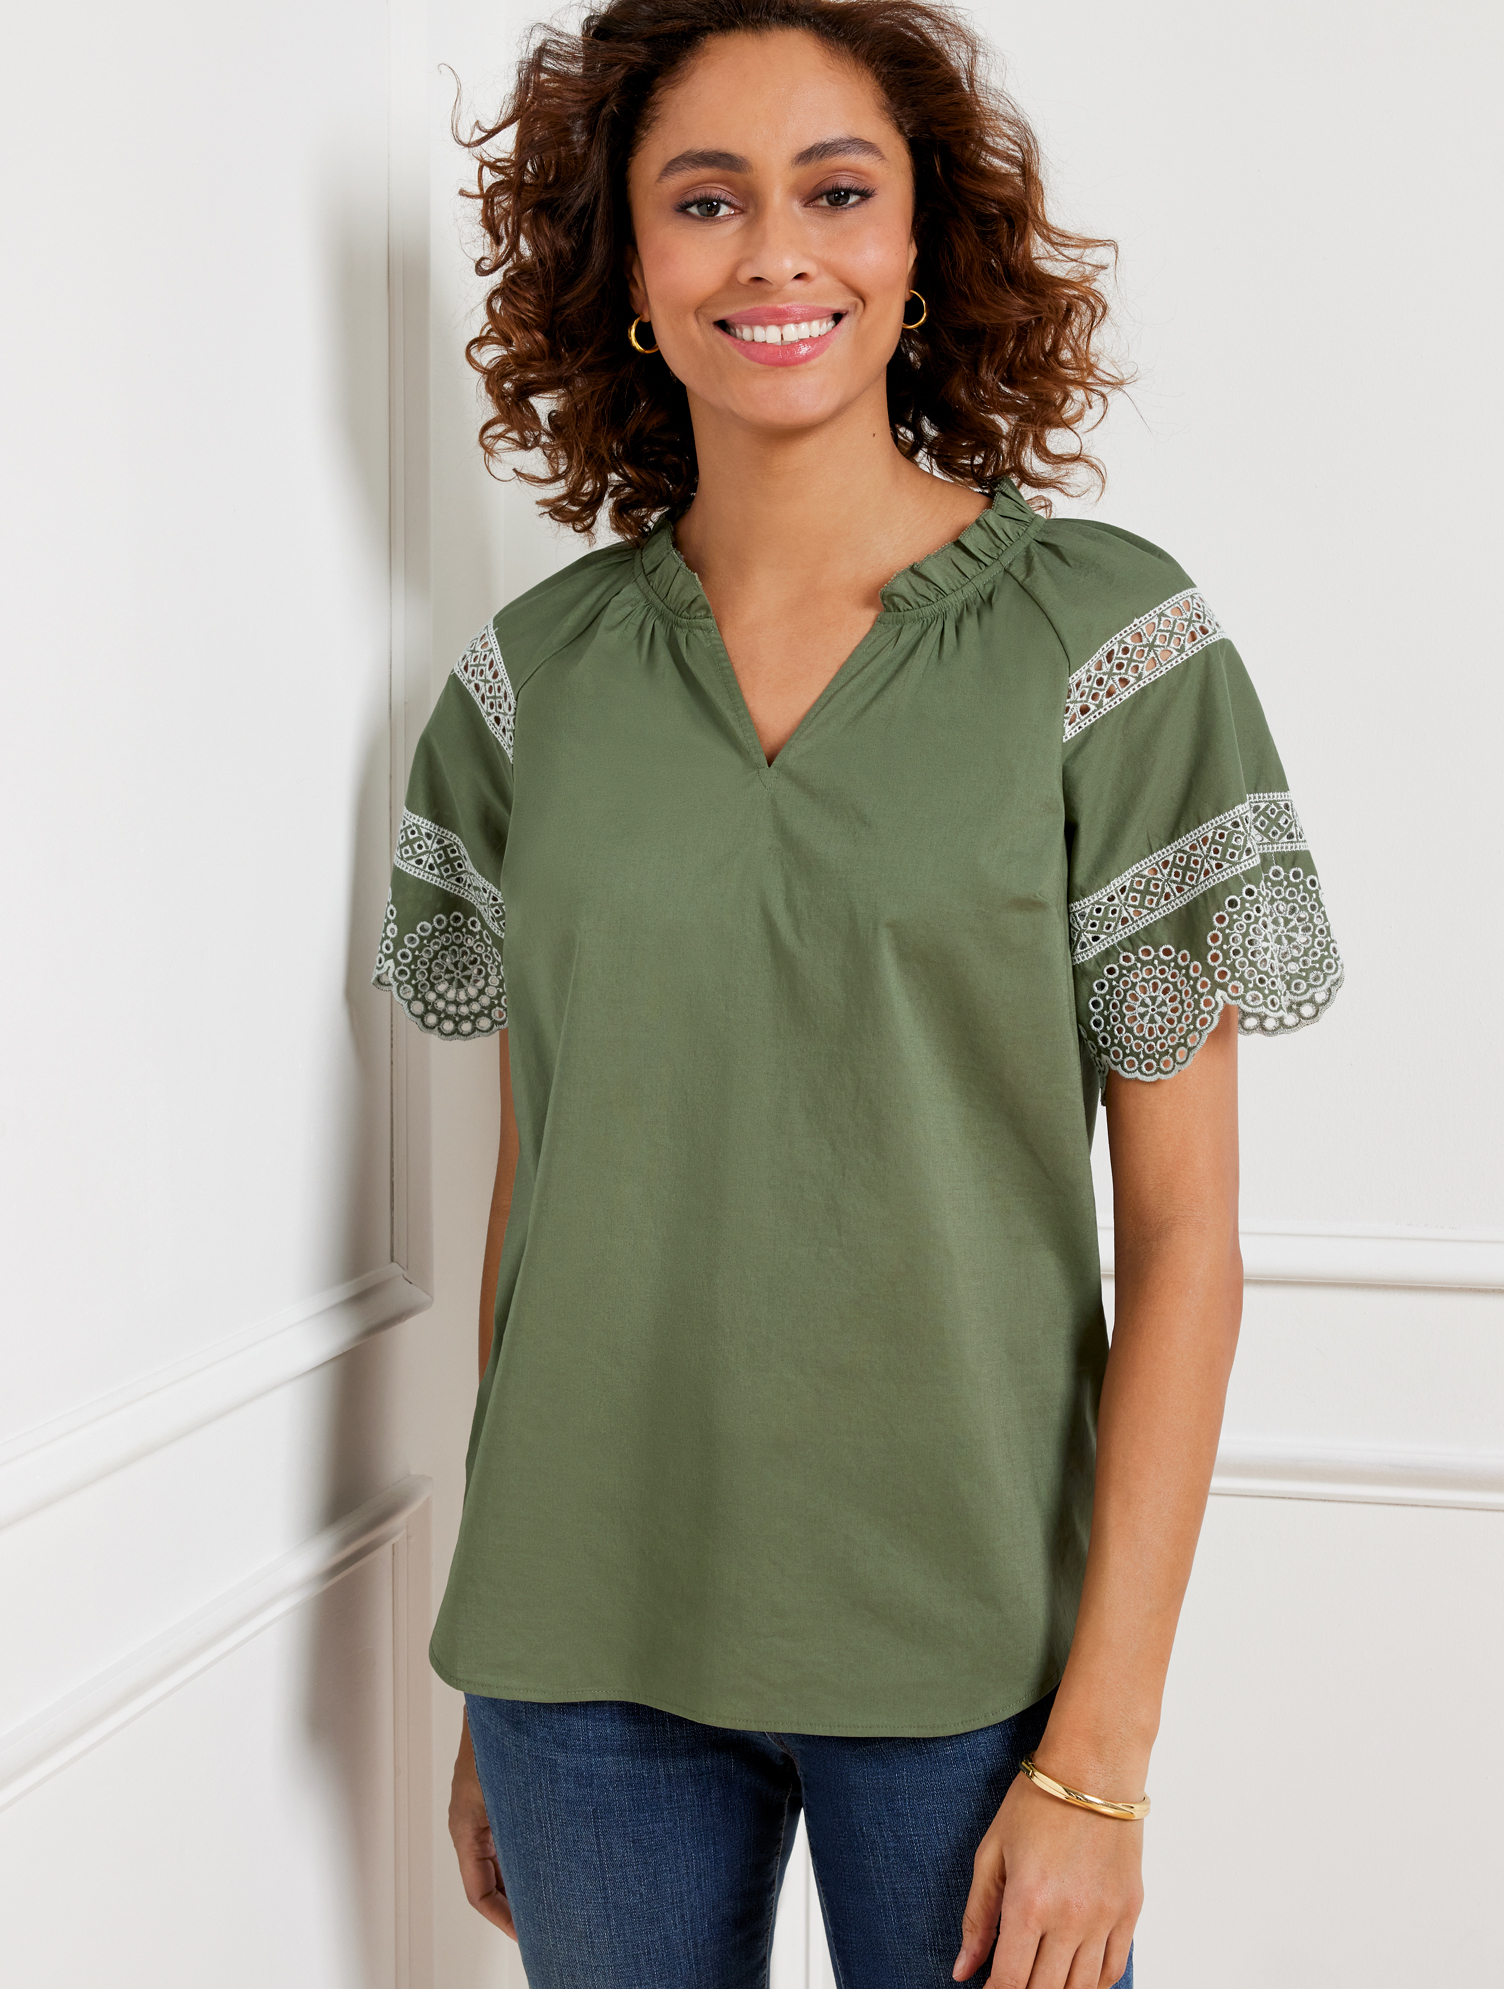 Talbots Petite - Embroidered Sleeve Top - Spring Moss - Large - 100% Cotton  | ModeSens